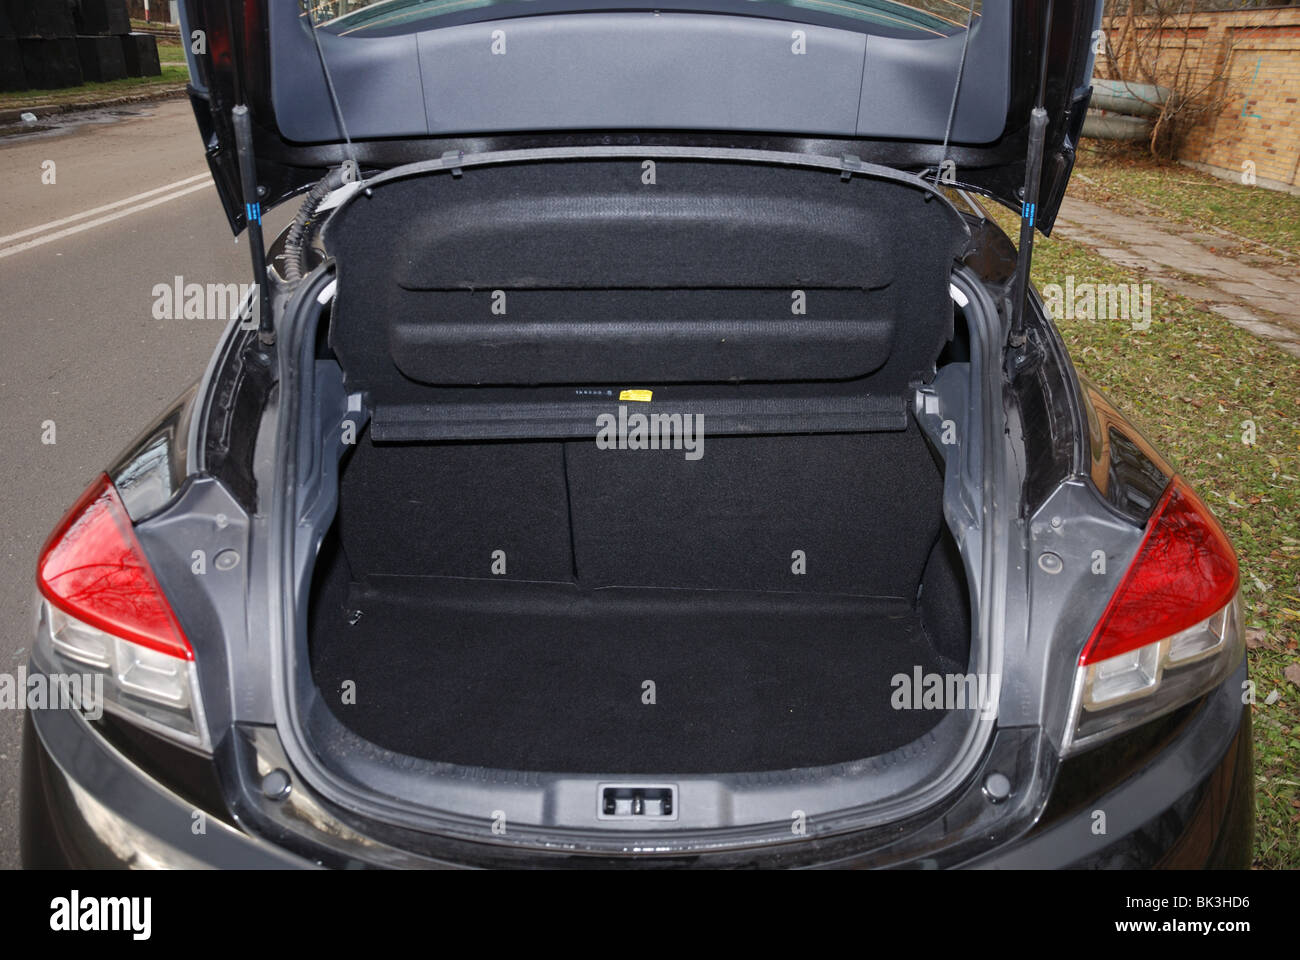 Elegantster Niedrigstpreis Renault Megane III Coupe 2.0 - - Stock trunk, - (2D) - metallic MY Alamy TCE boot compact black coupe - French - street, two doors Photo 2009 on